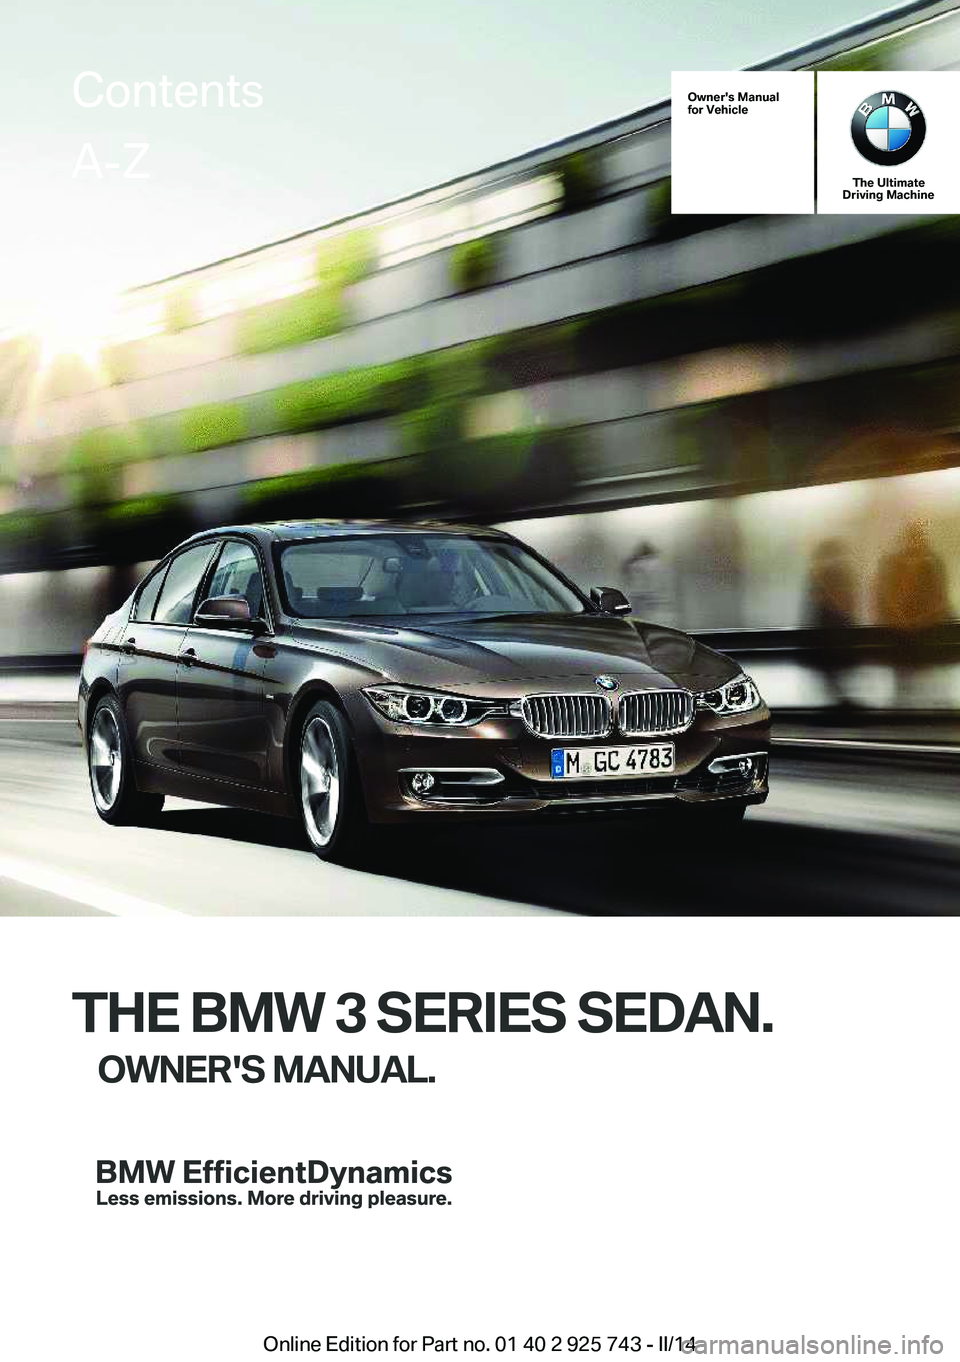 BMW 328I XDRIVE 2014  Owners Manual Owner's Manual
for Vehicle
The Ultimate
Driving Machine
THE BMW 3 SERIES SEDAN.
OWNER'S MANUAL.
ContentsA-Z
Online Edition for Part no. 01 40 2 925 743 - II/14   